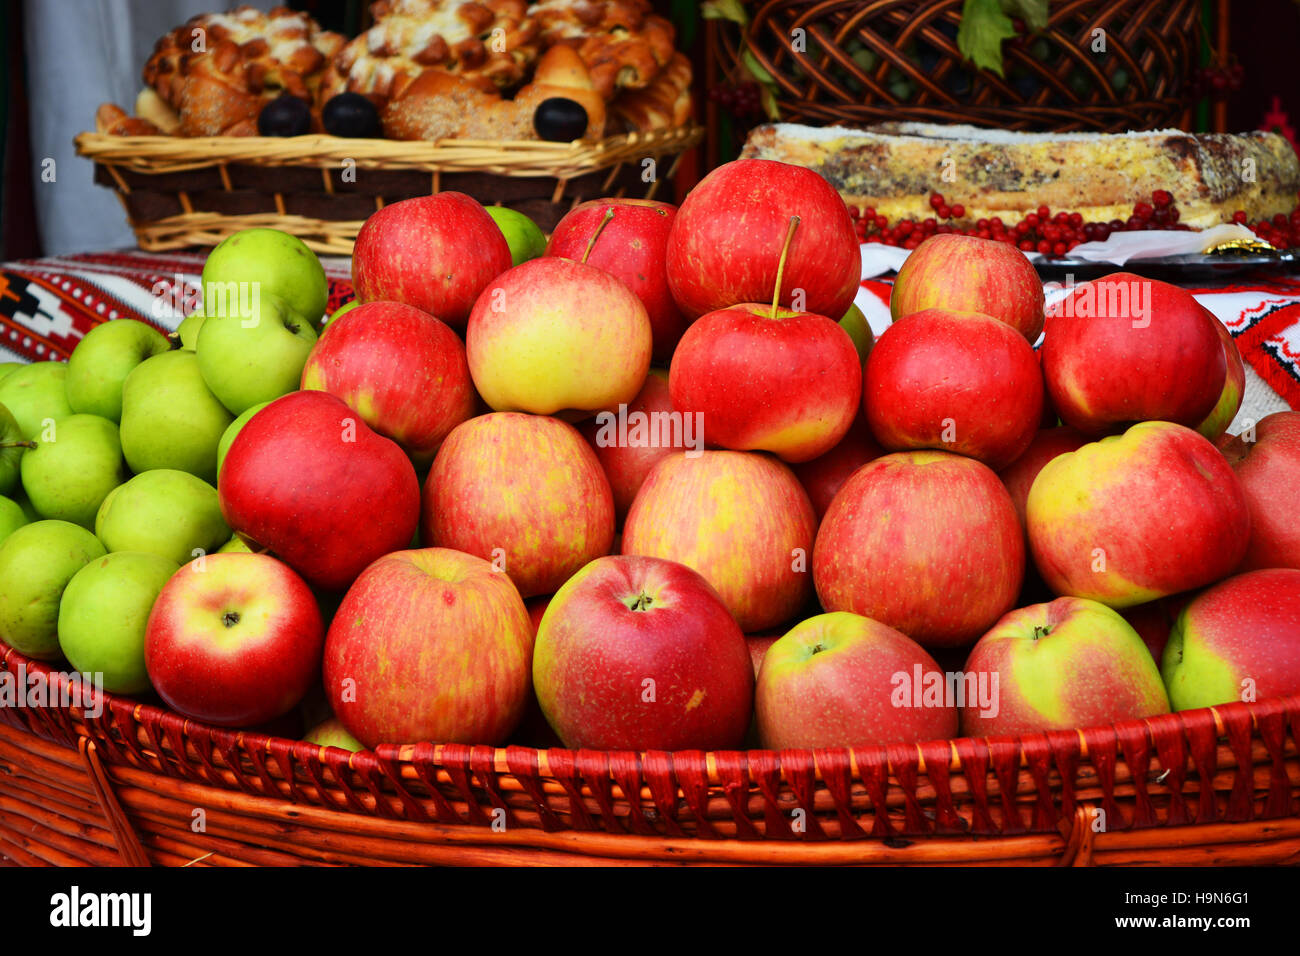 https://c8.alamy.com/comp/H9N6G1/close-up-of-green-apples-stacked-in-a-basket-H9N6G1.jpg